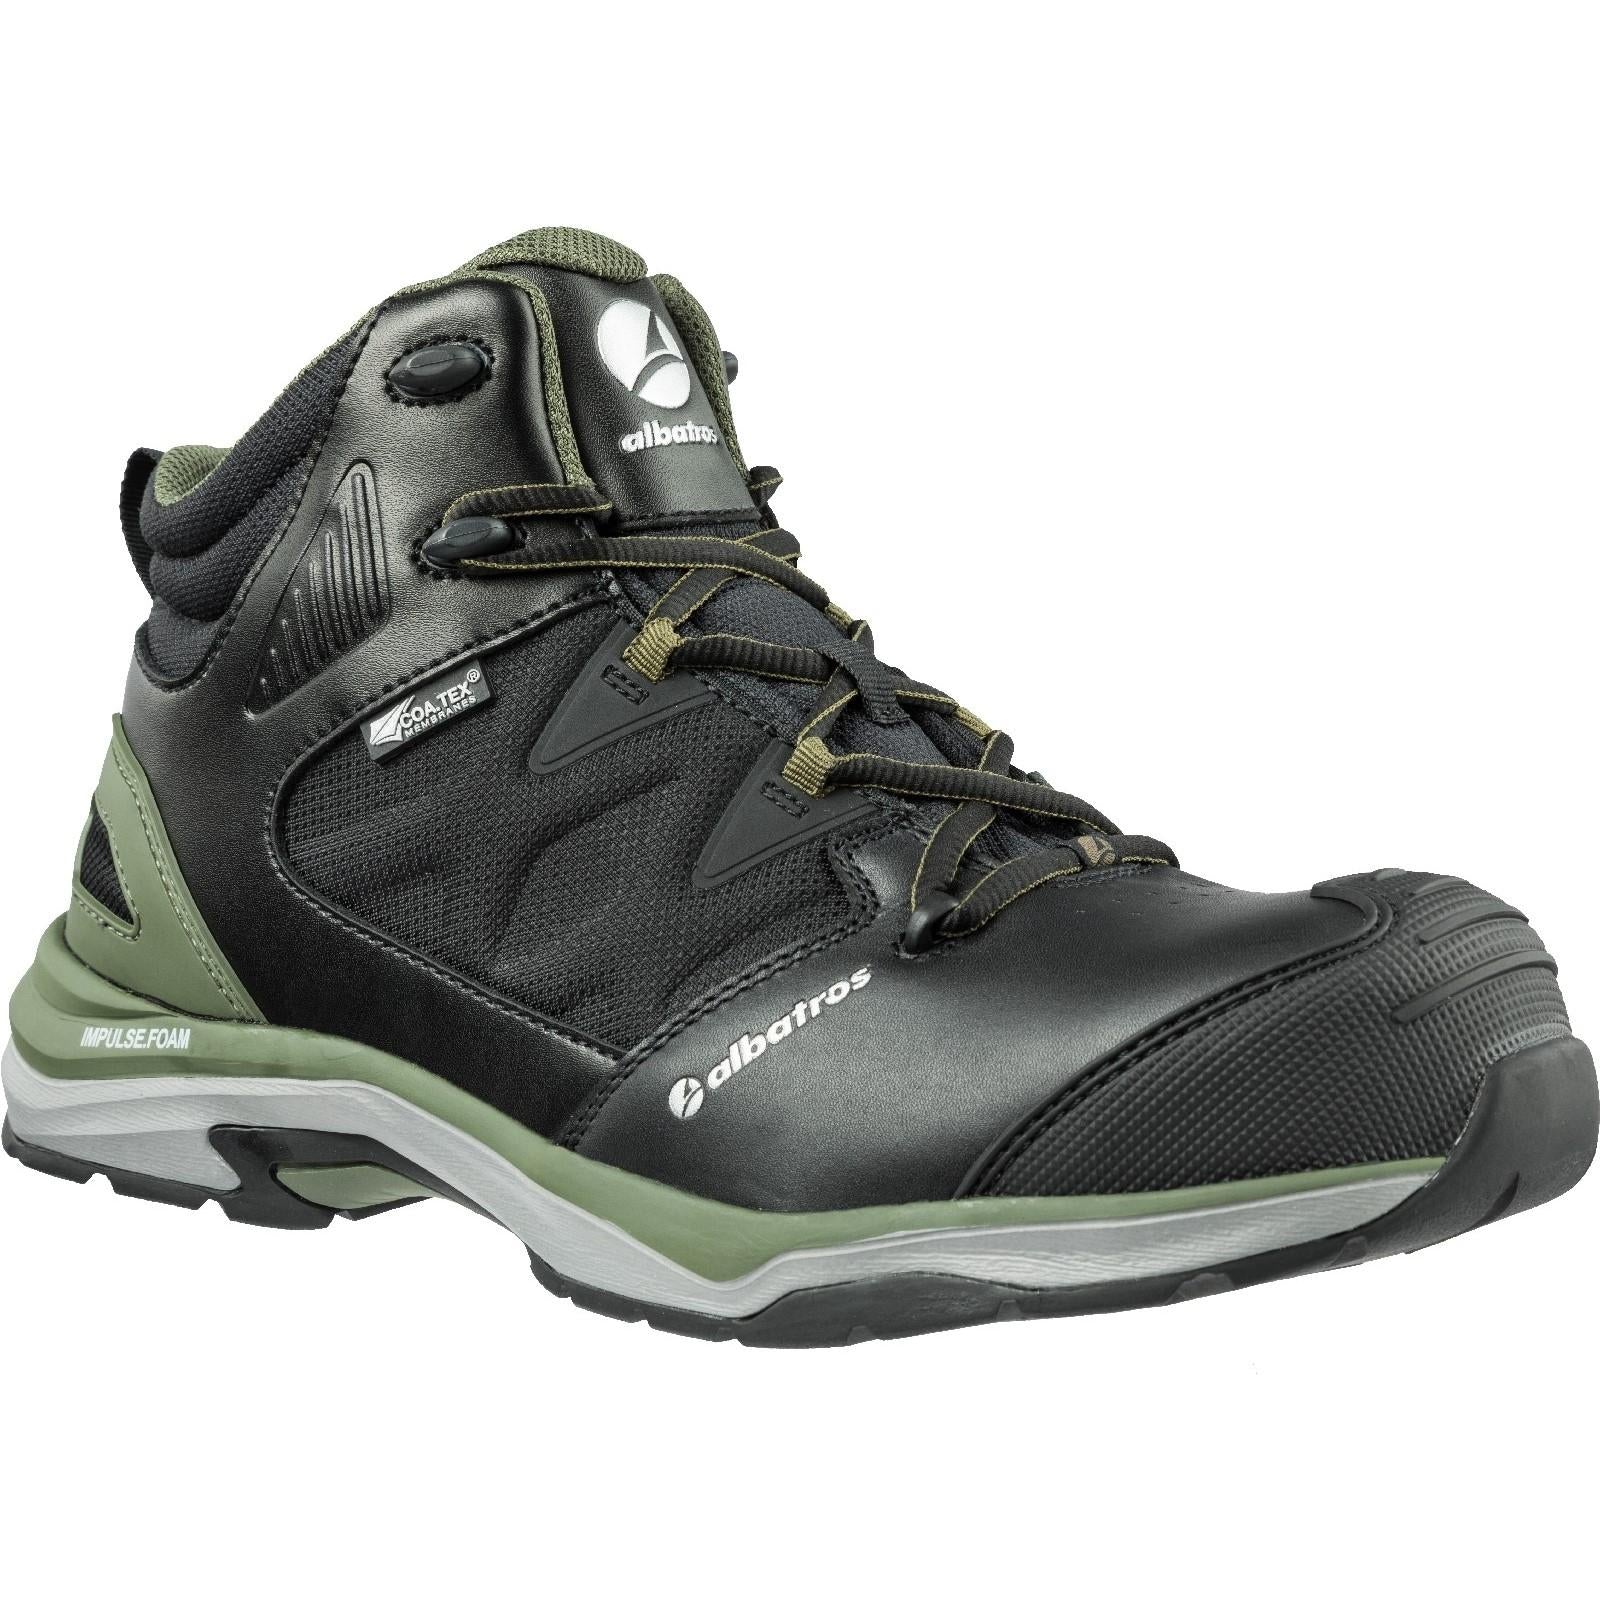 Albatros Ultratrail Olive Ctx Mid Safety Boot